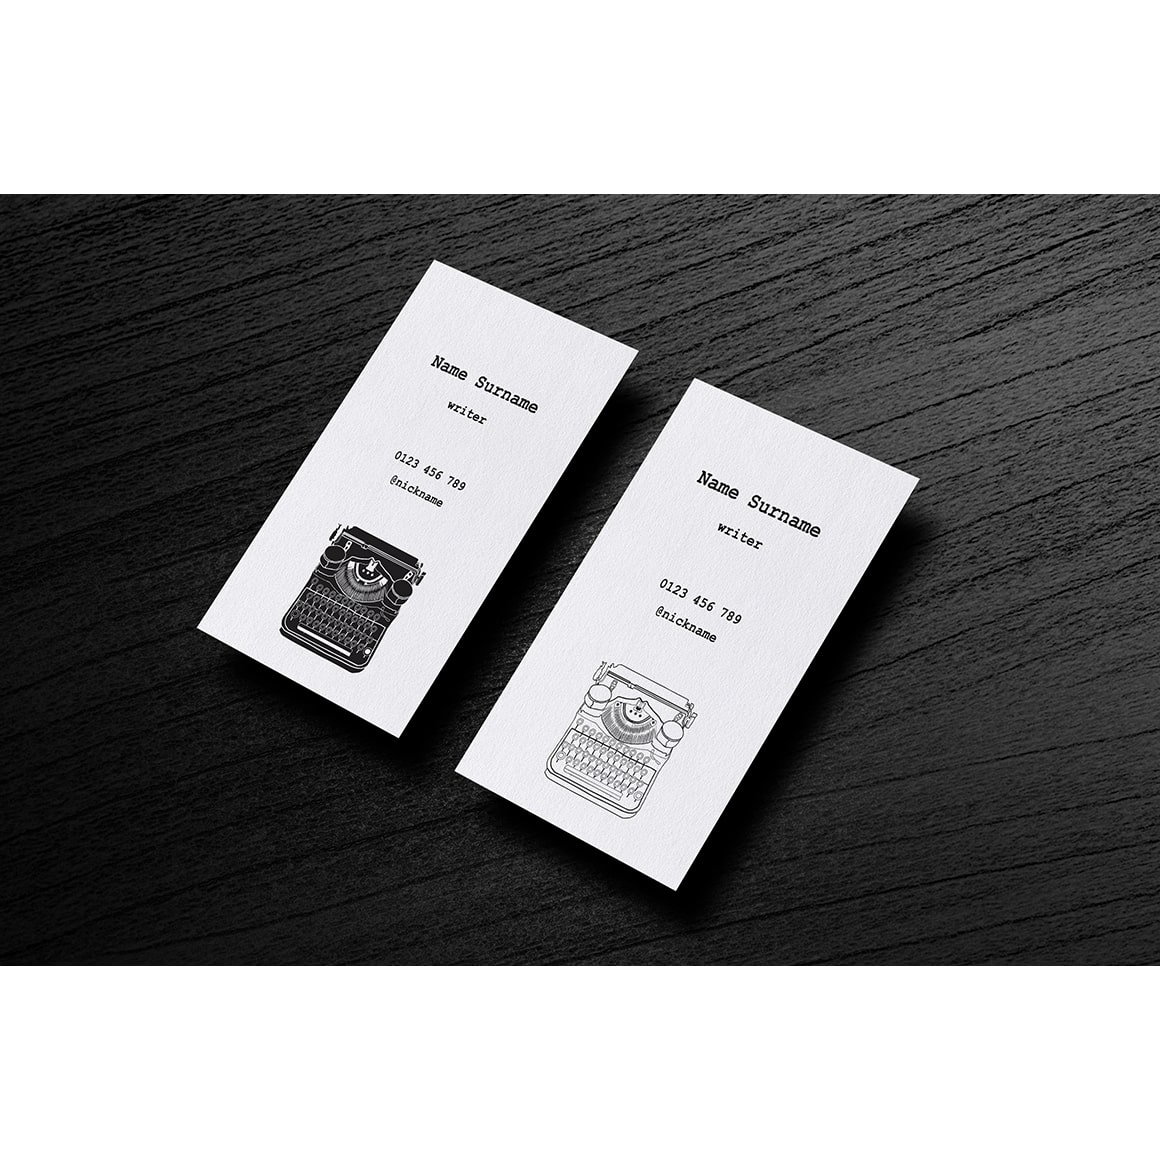 Business Cards with Typewriters black & white.